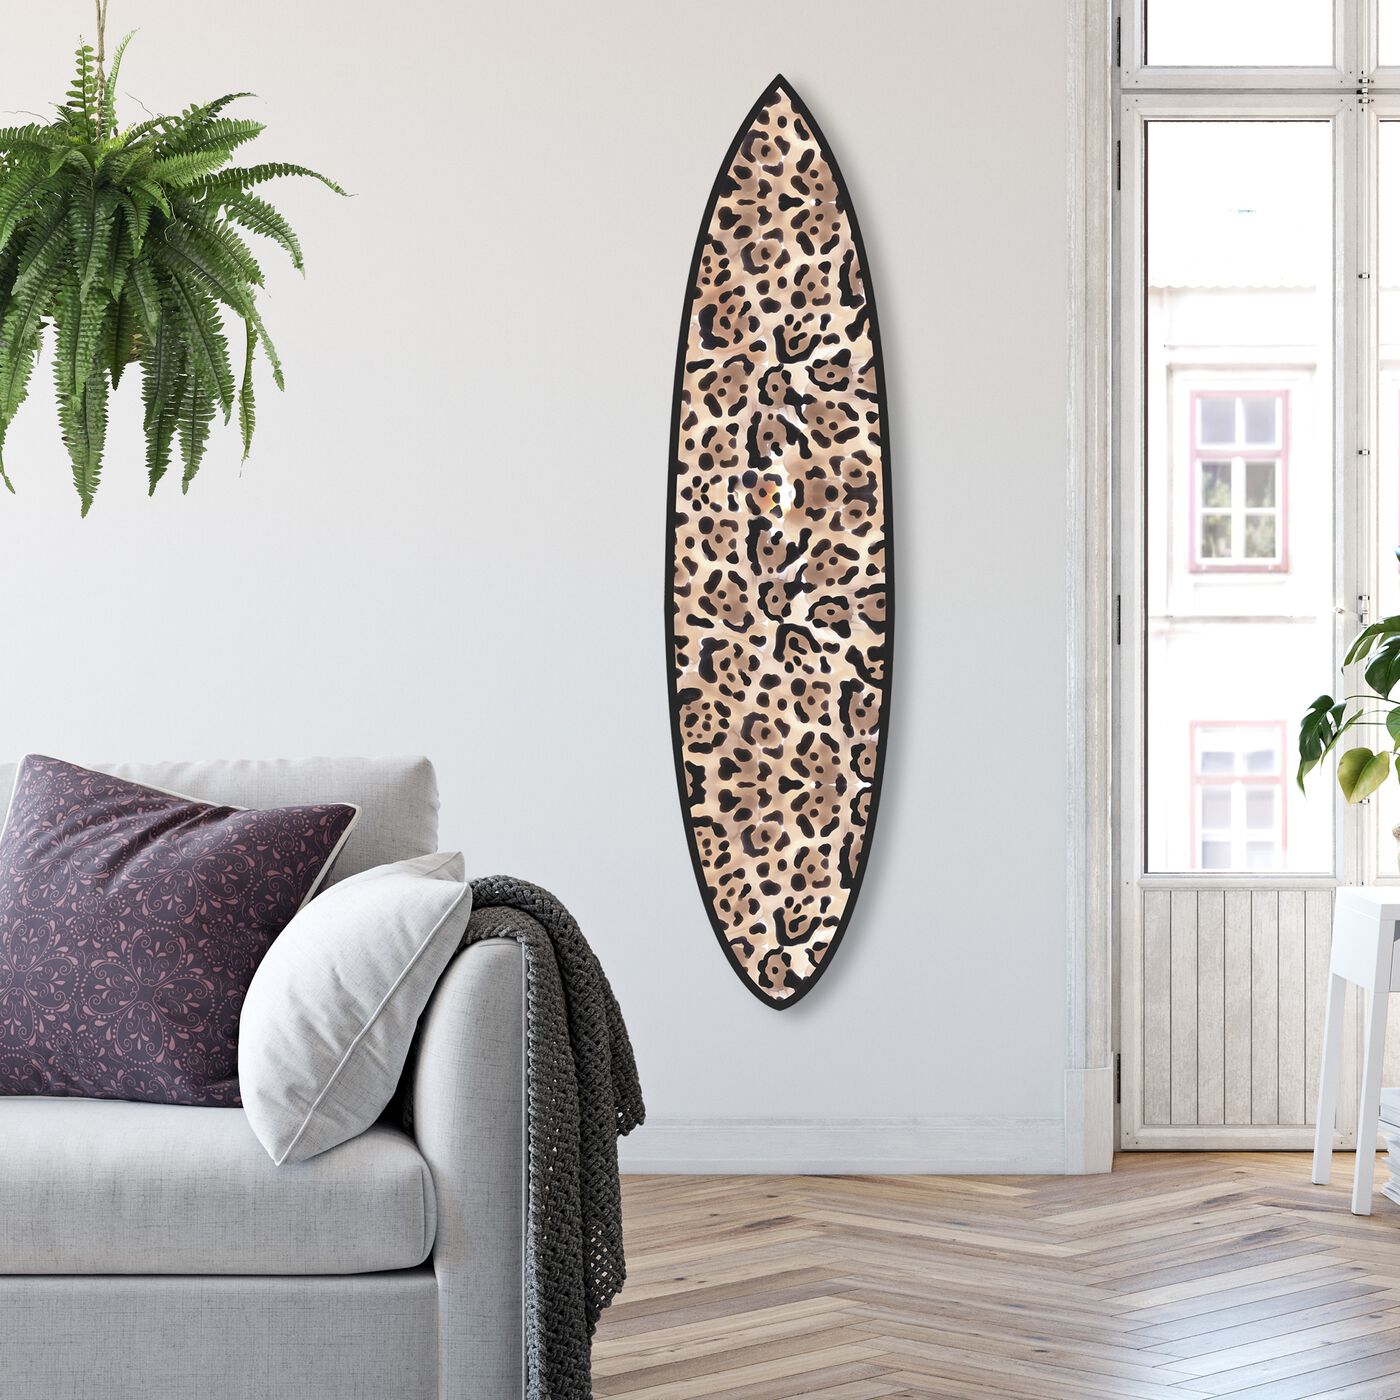 Oliver Gal C'est Chic Surfboard - Decorative Surfboard Wall Art Print on  Acrylic